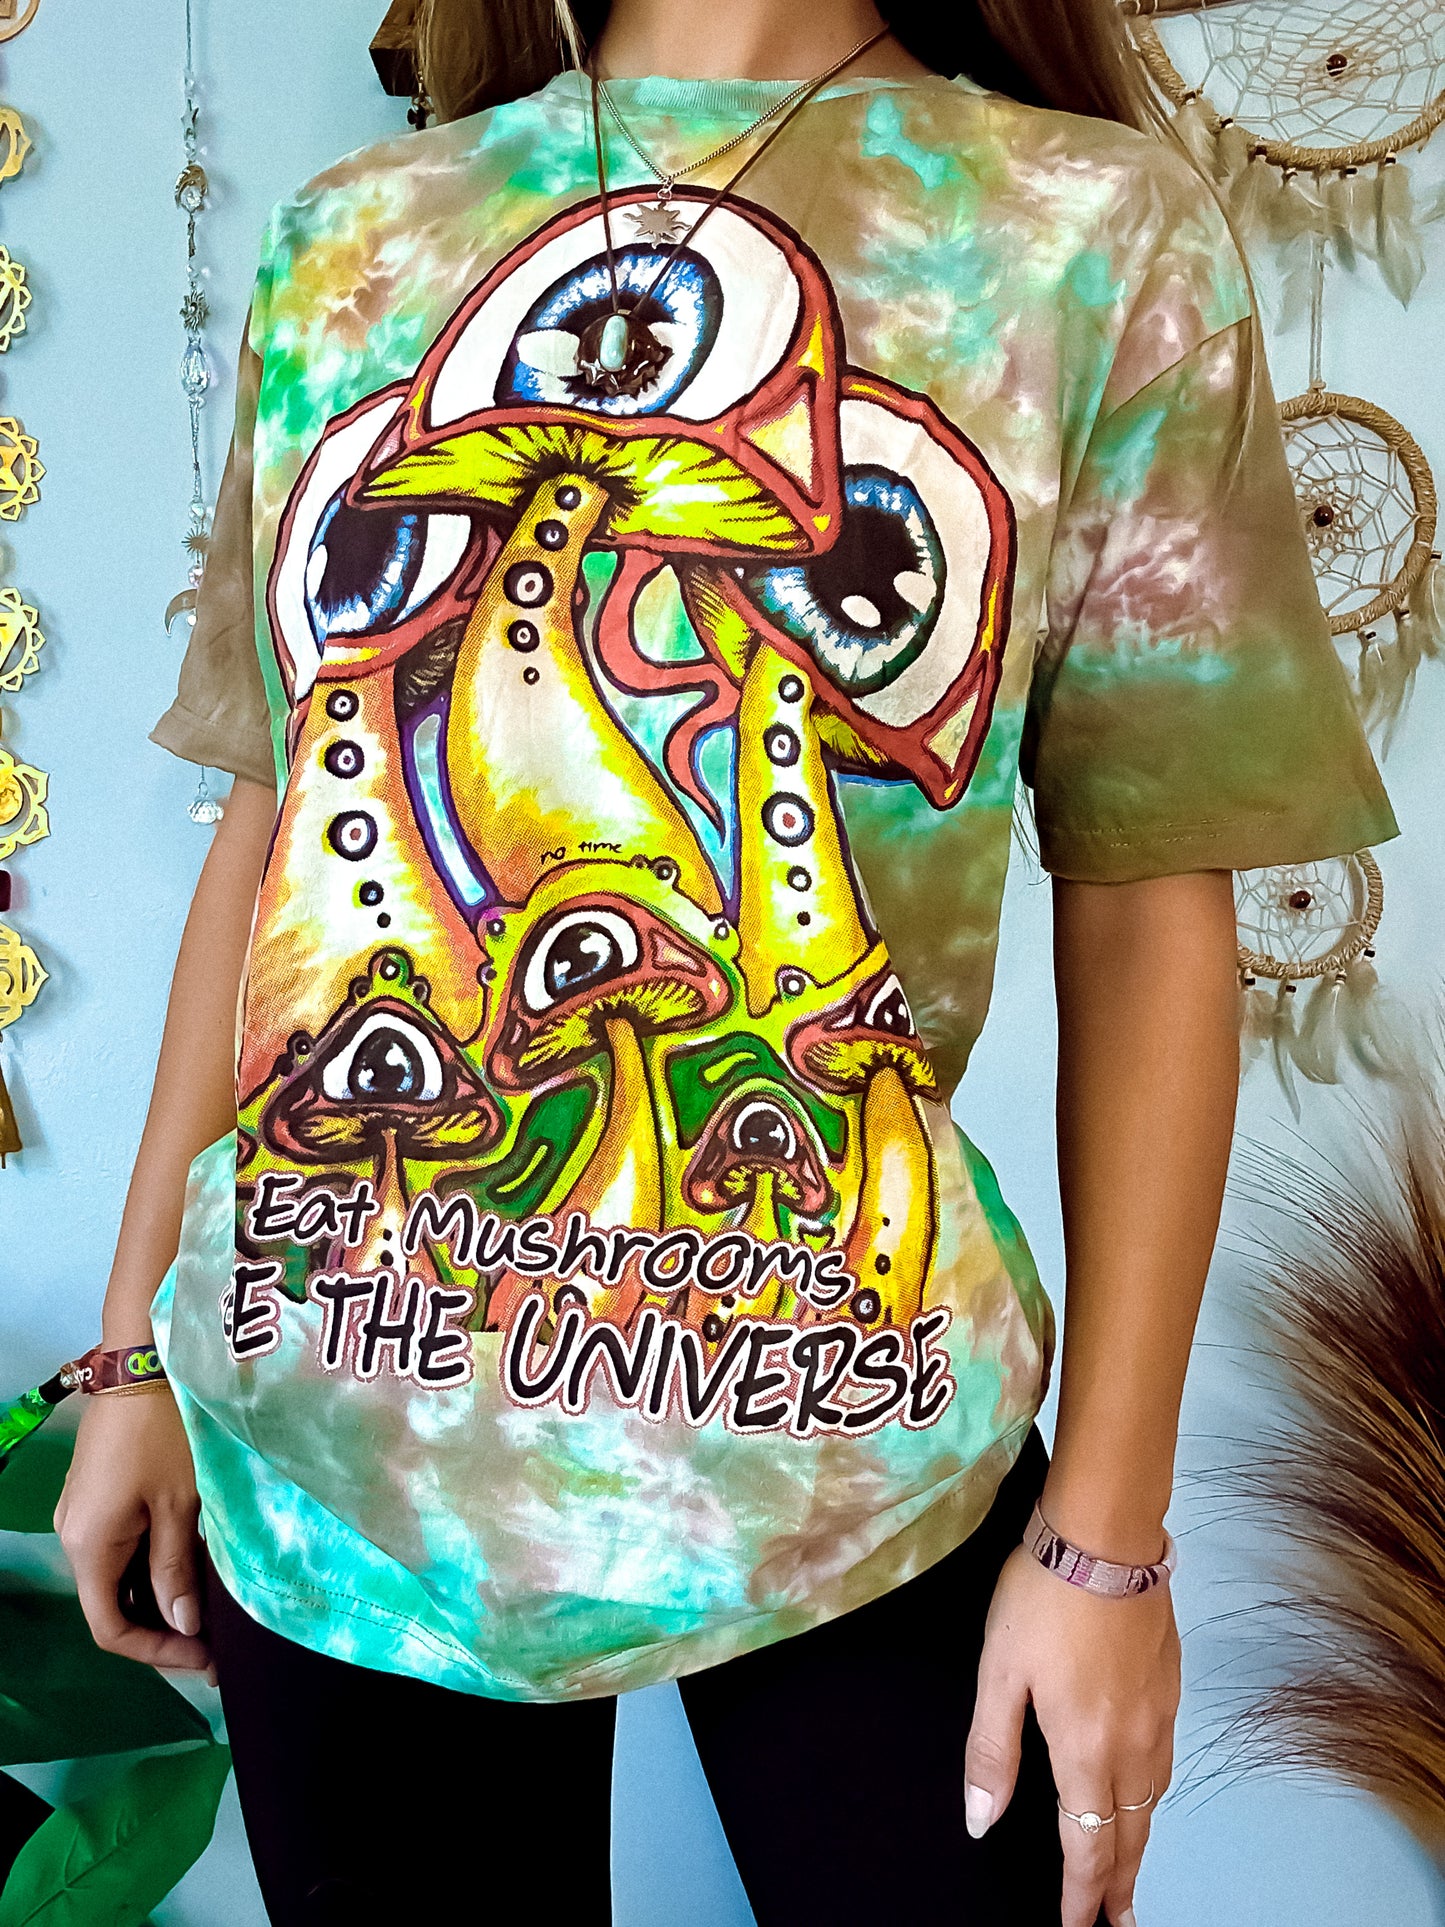 SEE THE UNIVERSE T-SHIRT